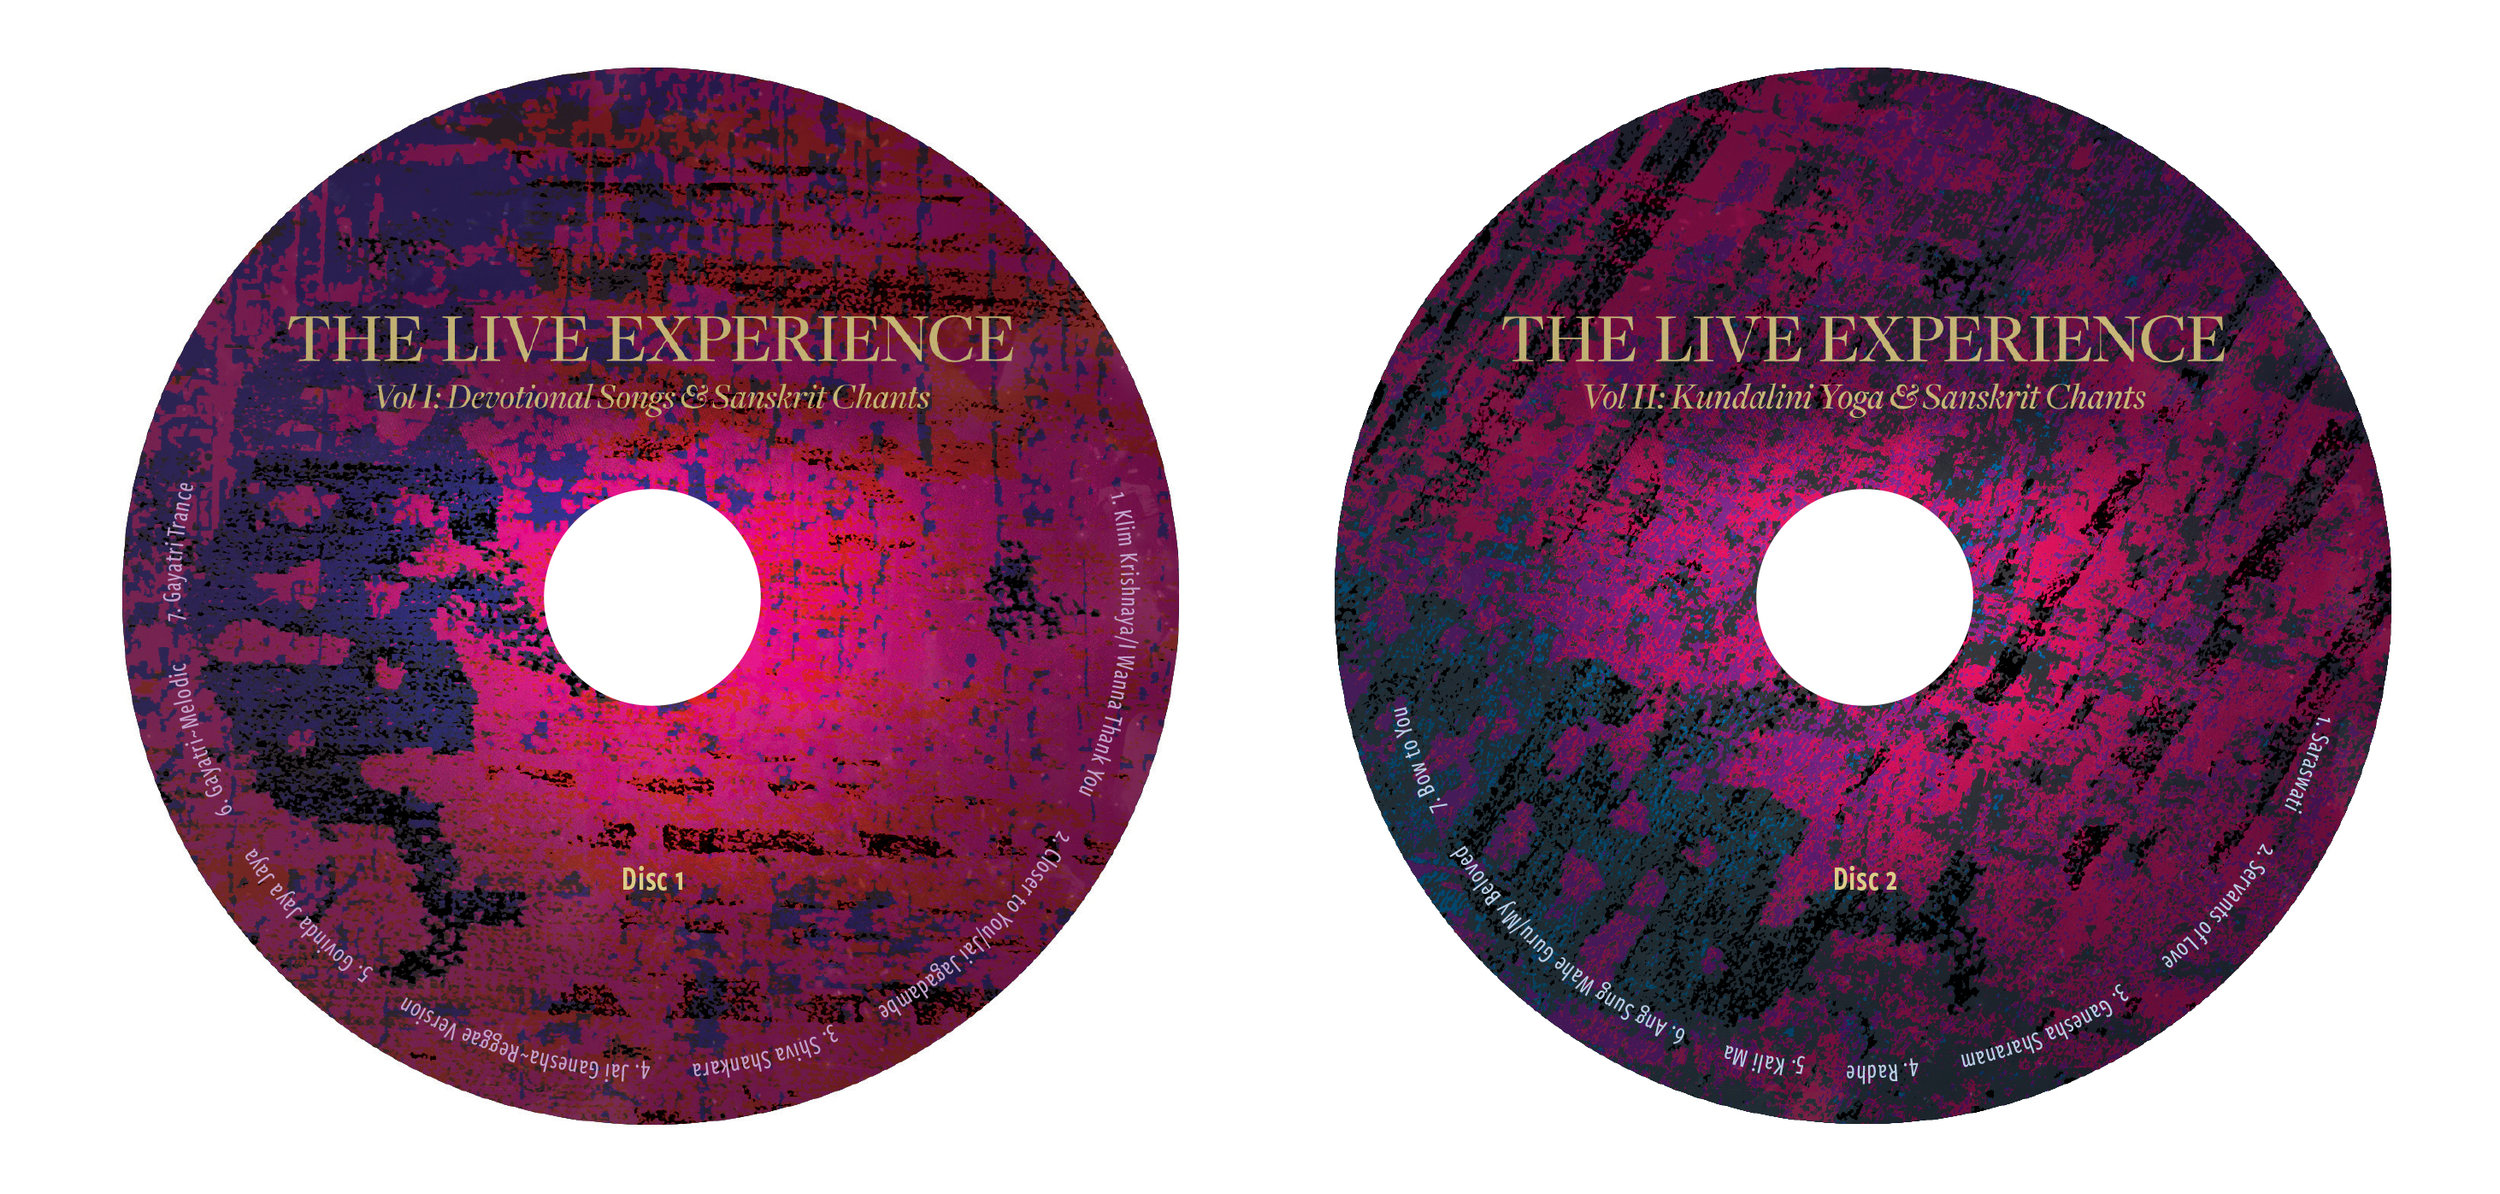  The Live Experience: Discs 